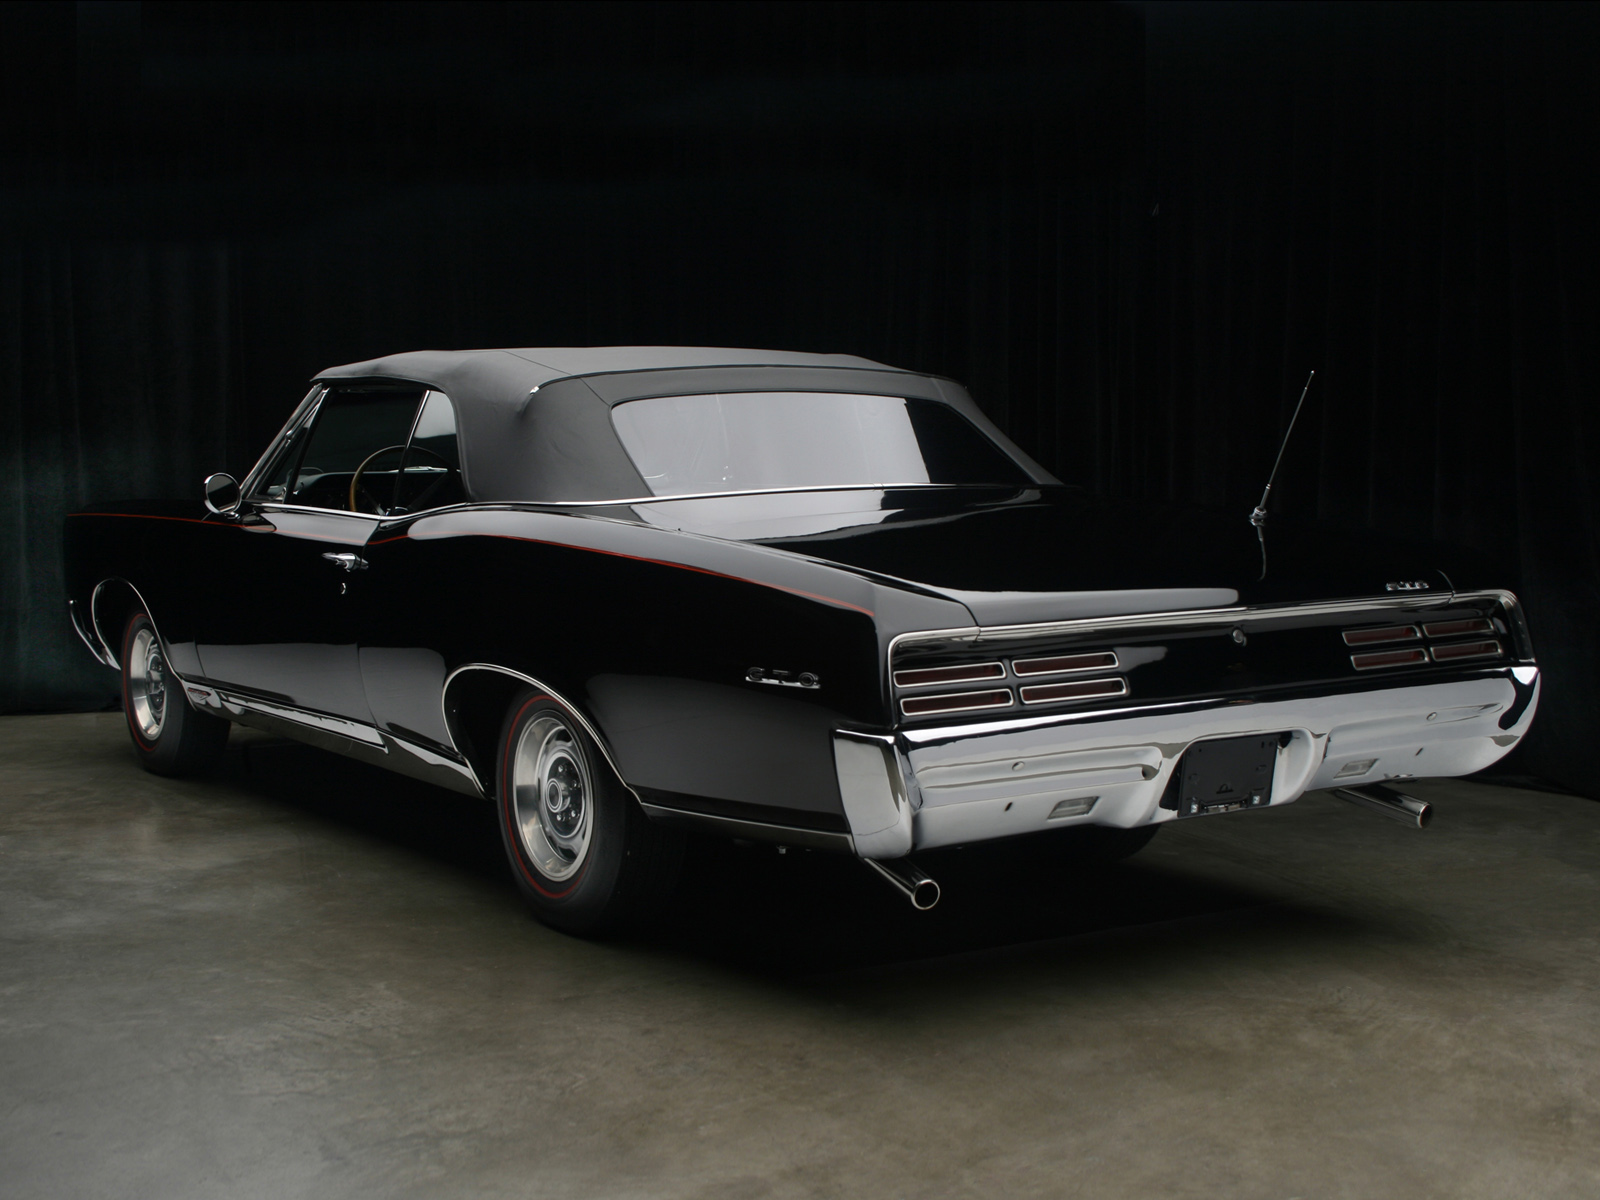 1967, Pontiac, Tempest, Gto, Ho, Convertible, Muscle, Classic, H o Wallpaper